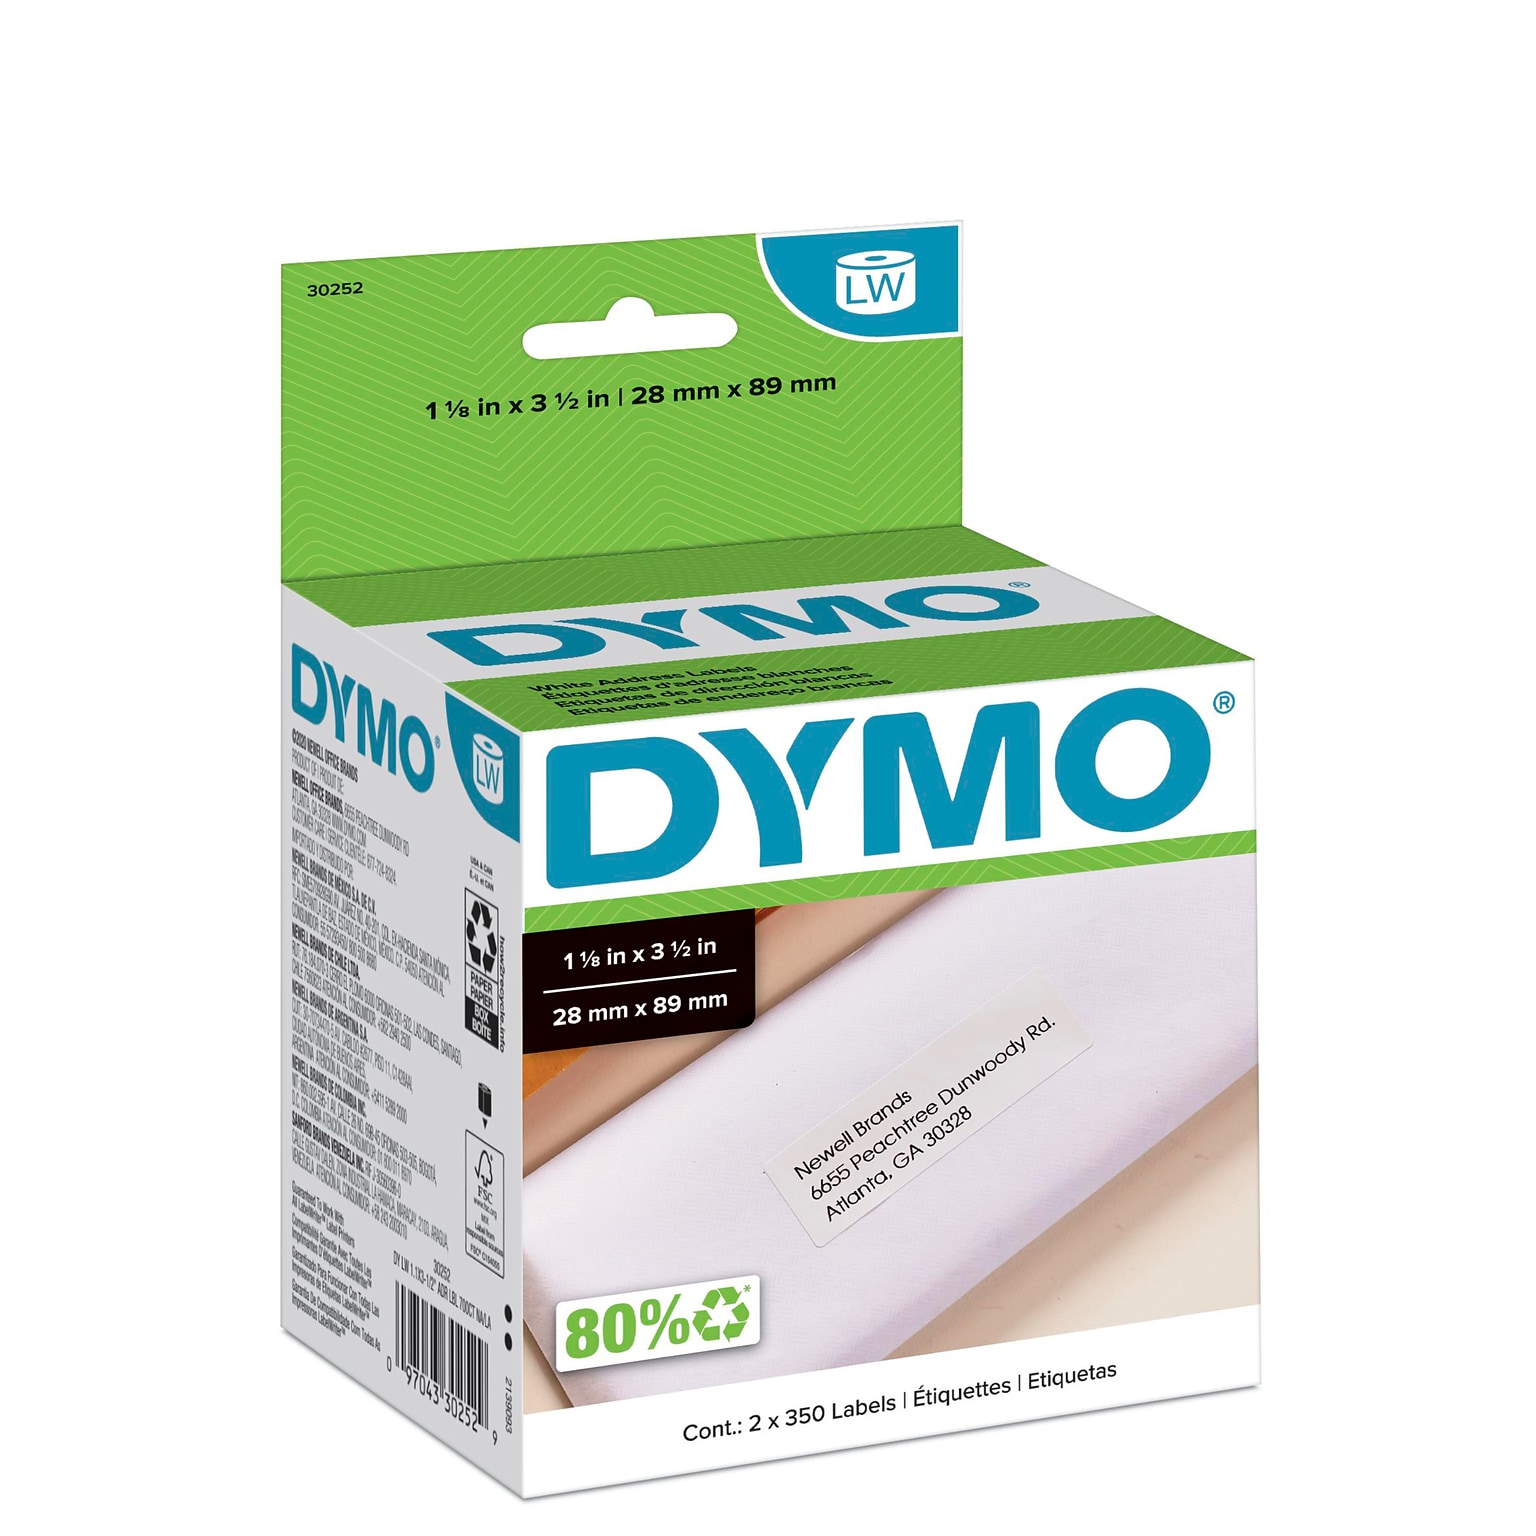 DYMO LabelWriter 30252 Mailing Address Labels, 3-1/2 x 1-1/8, Black on White, 350 Labels/Roll, 2 Rolls/Box (30252)